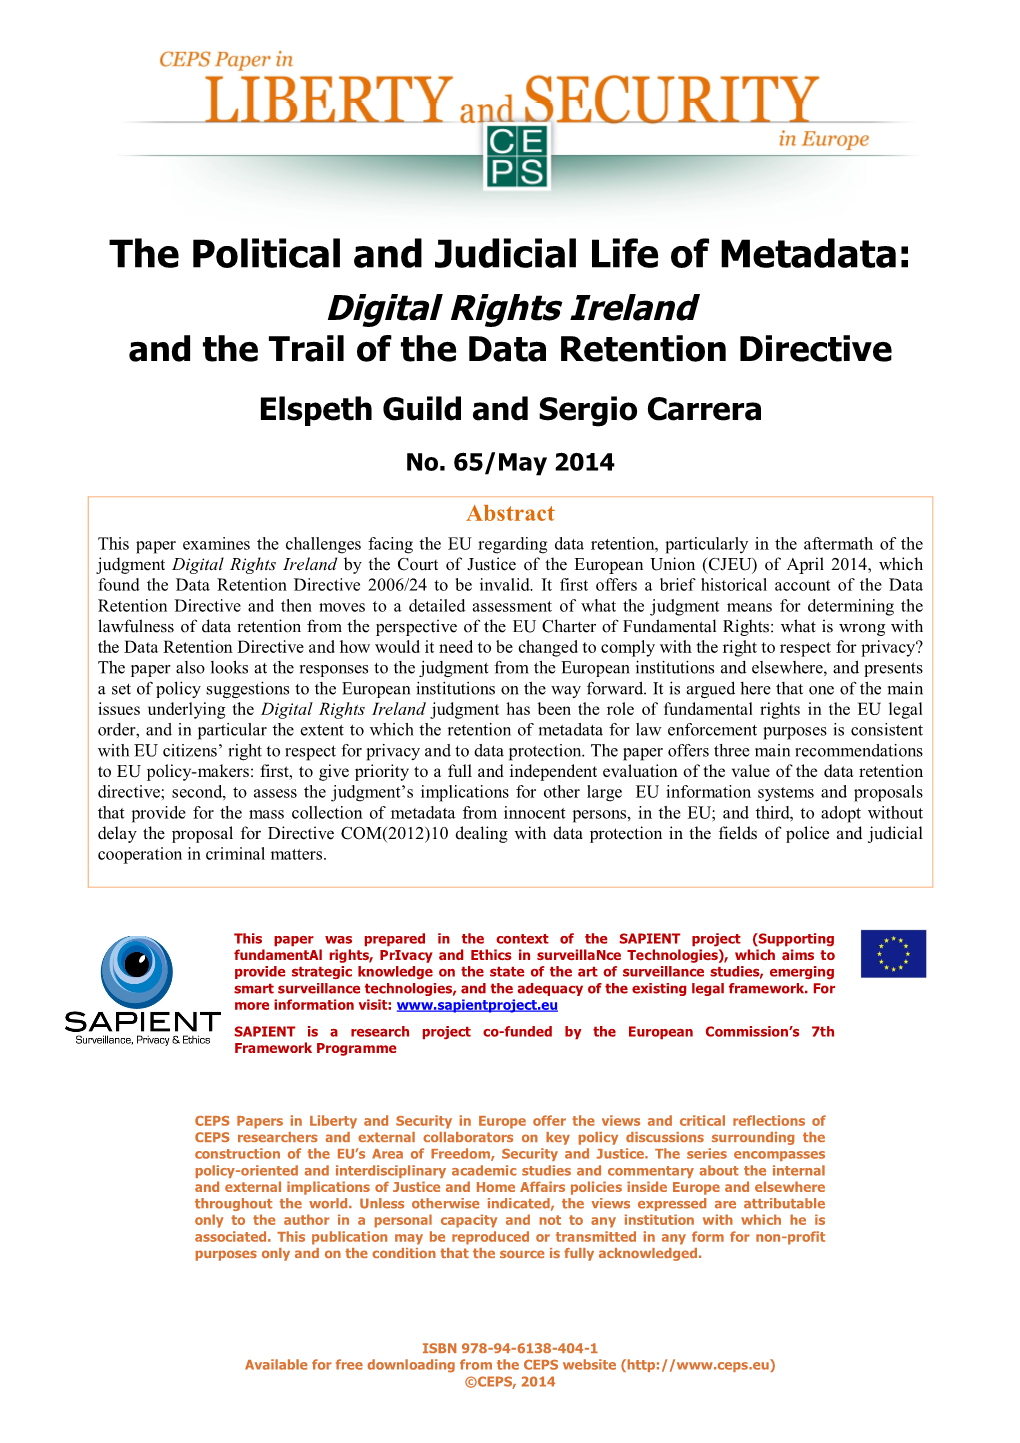 The Political and Judicial Life of Metadata: Digital Rights Ireland and the Trail of the Data Retention Directive Elspeth Guild and Sergio Carrera